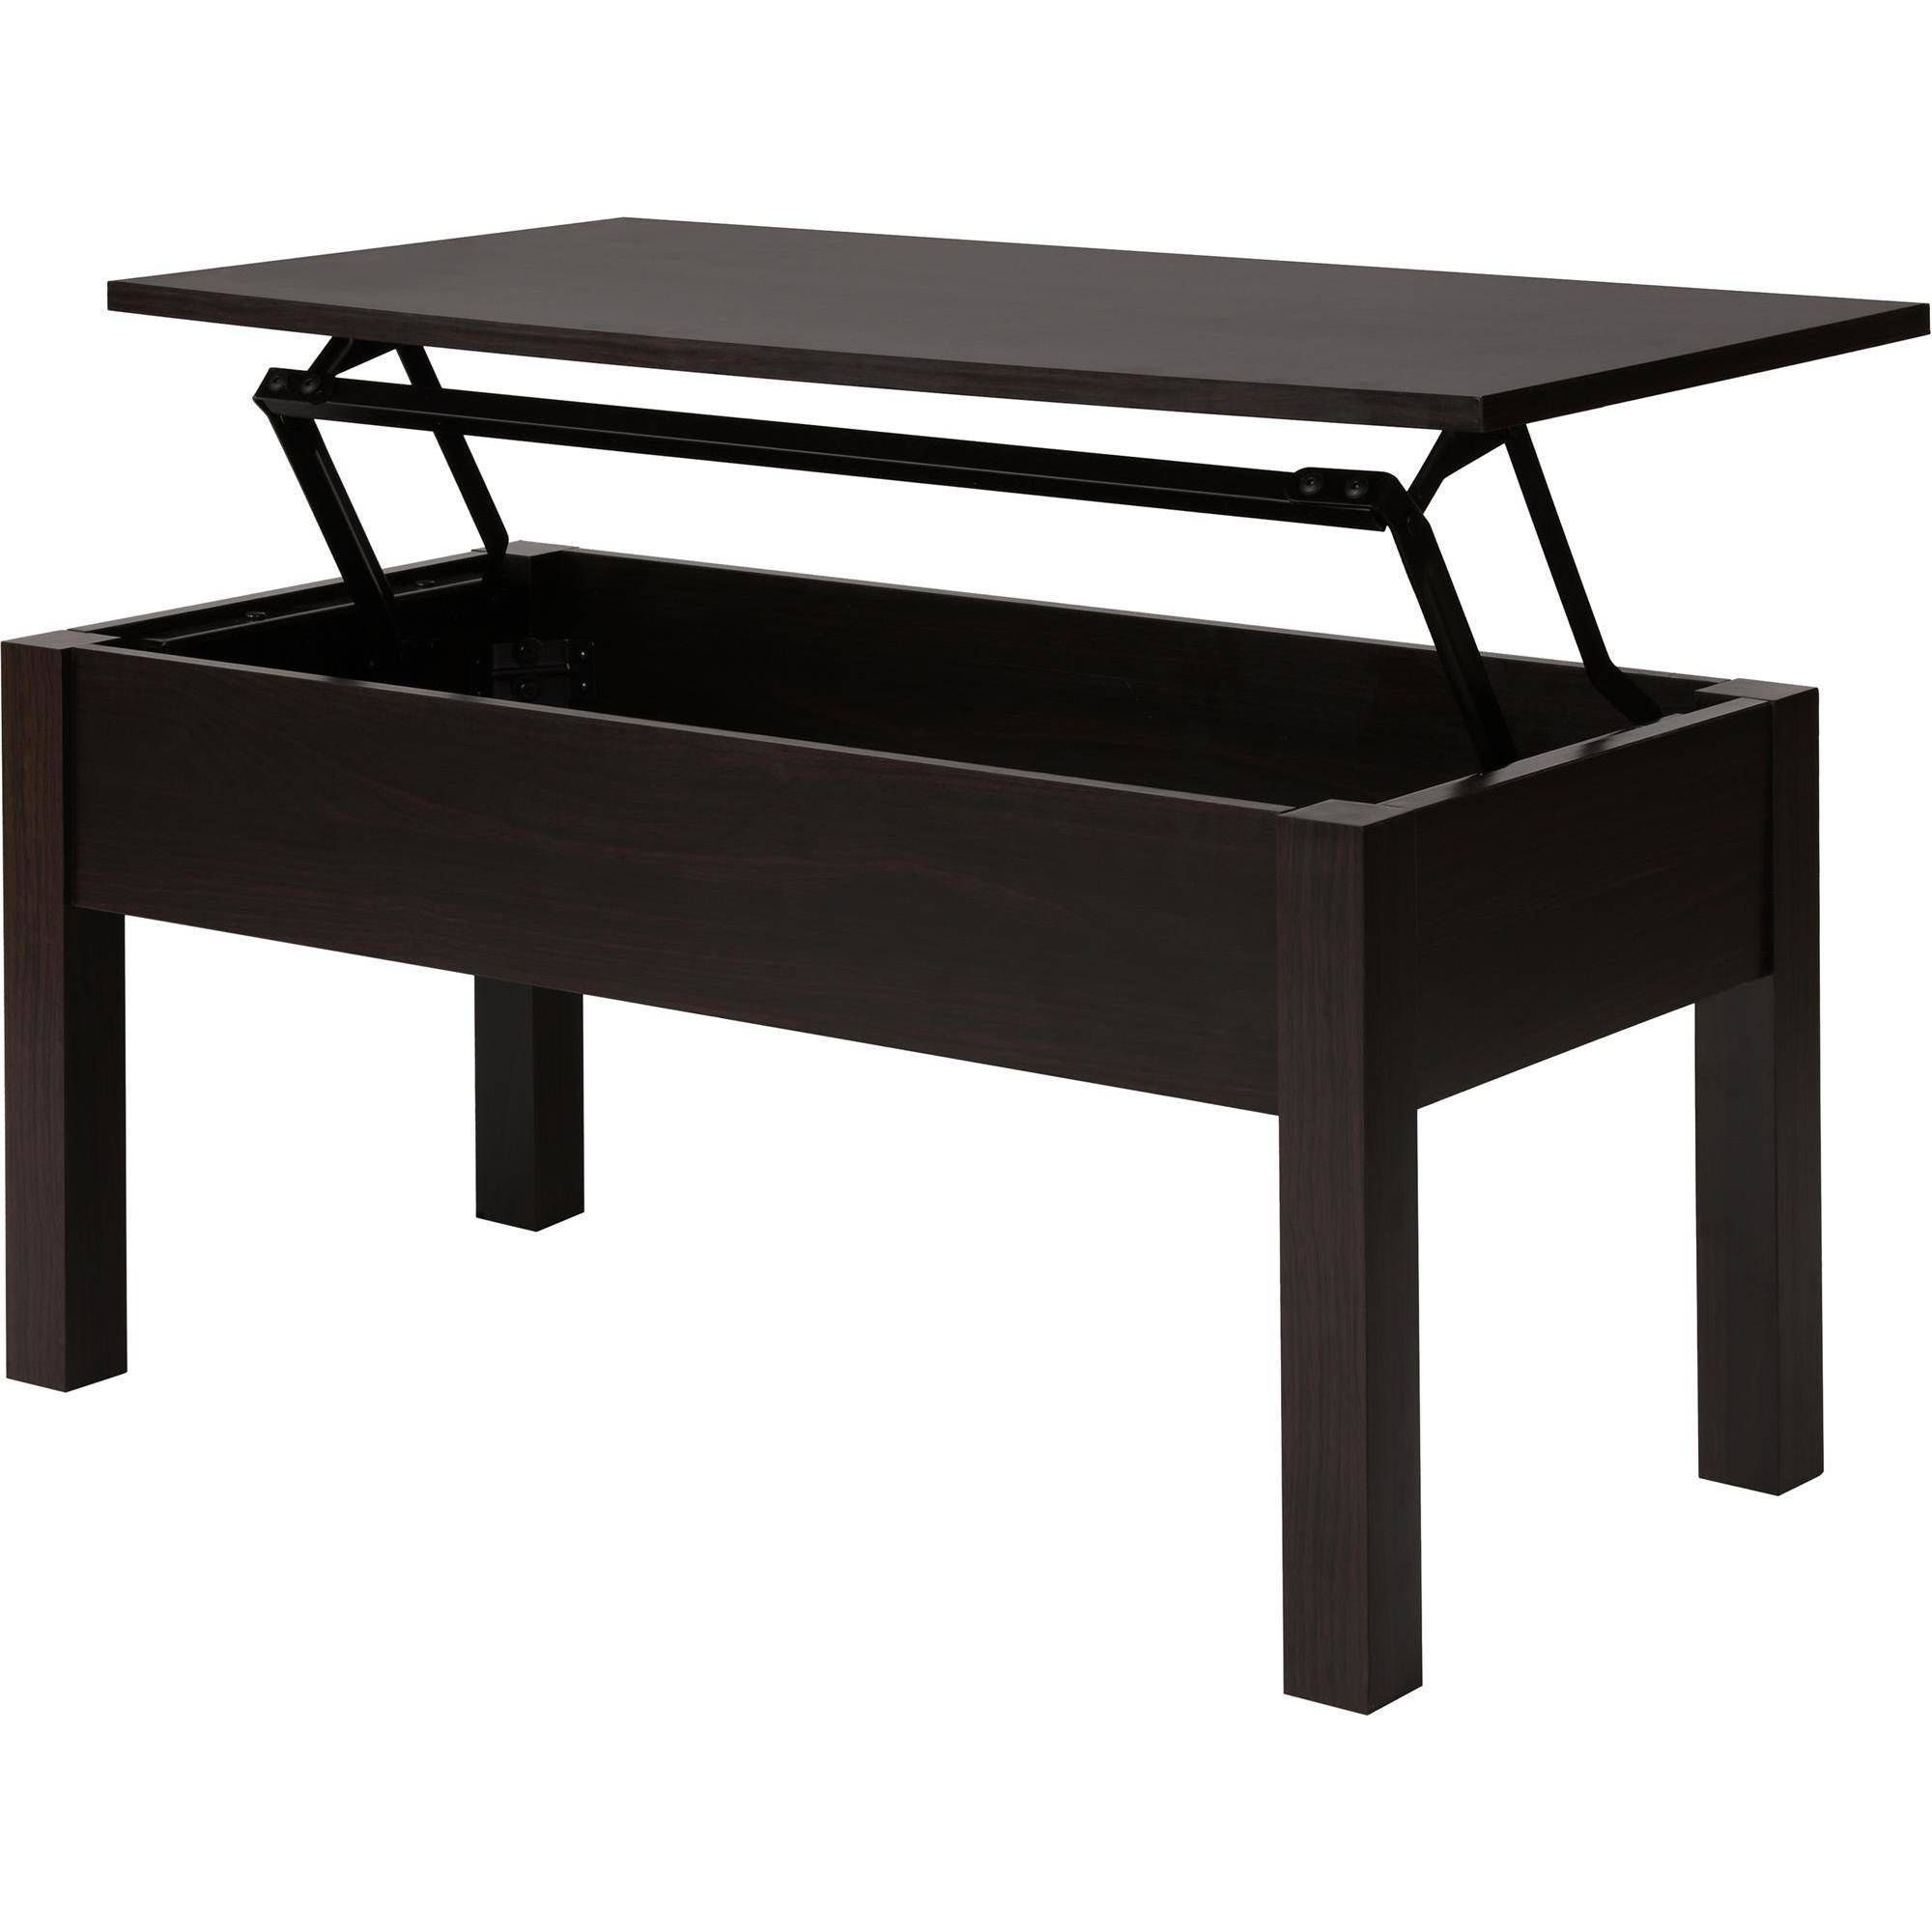 Recent Jaxon Grey Lift Top Cocktail Tables Within Lovely Table Top Coffee Loon Peak Bryan Lift Reviews Wayfair – Just (View 4 of 20)